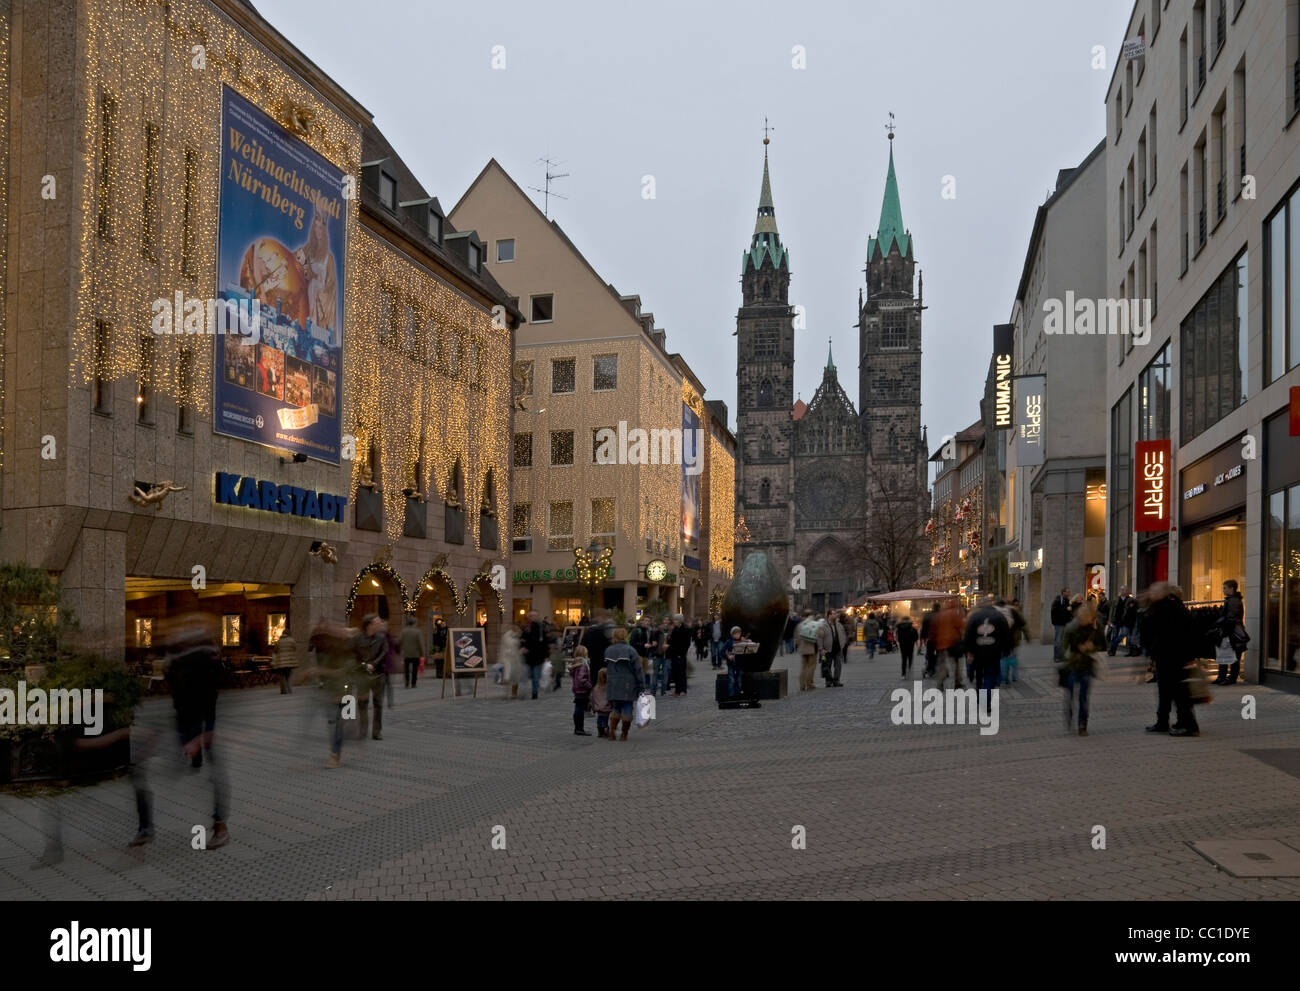 The shopping precinct in the old town of Nuremberg, with the impressive Lorenz Church, Franconia, Bavaria, Germany, Europe. Stock Photo